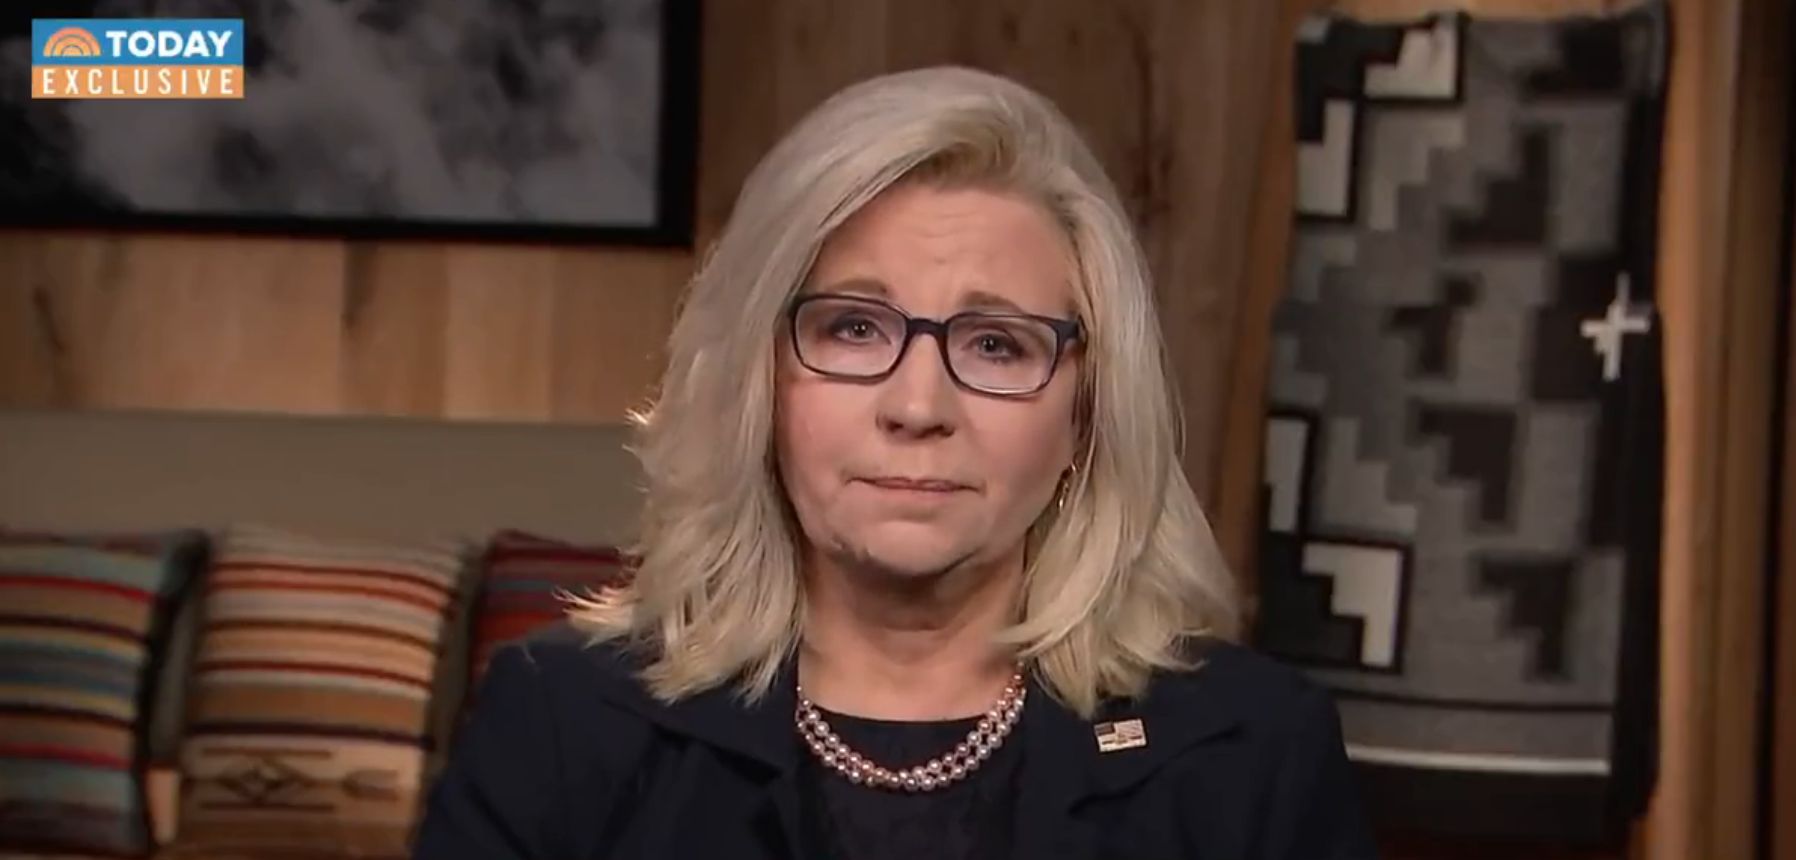 After Liz Cheney Gets Demolished in Primary, She Says She May ‘Run for President’ to Stop Trump